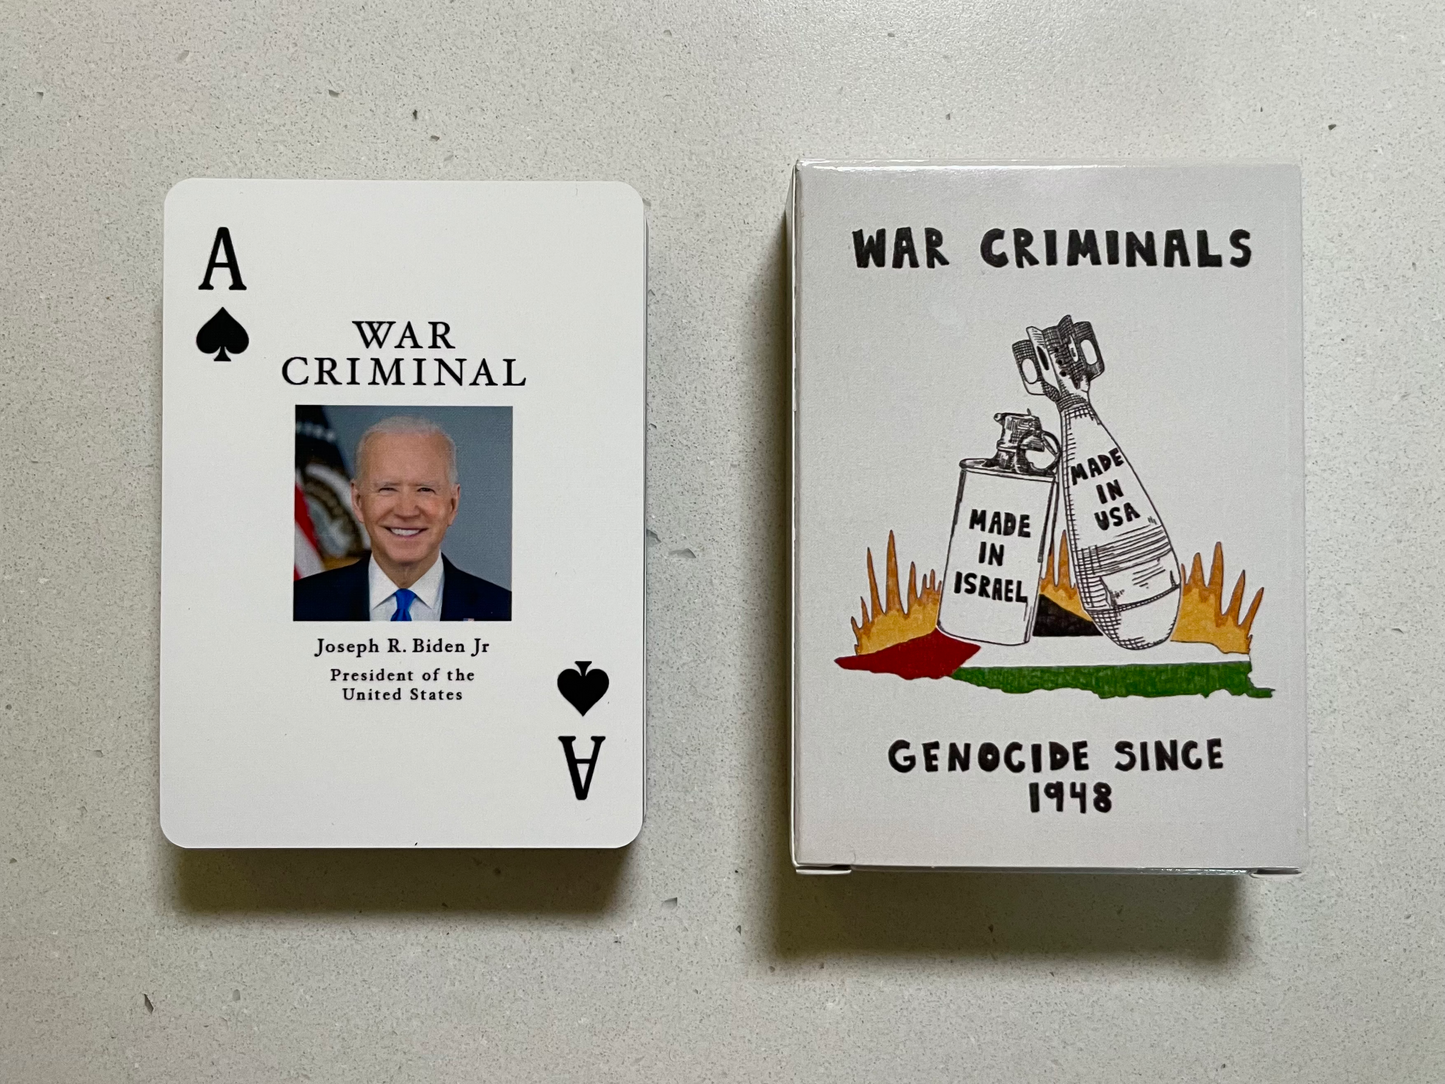 A photo of playing cards box and the Ace of Spades laid side by side on a white stone background. The Ace of Spades centers a photo of Joseph R. Biden, Jr and includes the title “War Criminal" above the photo and his name and professional title below the photo. The War Criminals Playing Cards box includes an illustration of a tear gas canister and a bomb, the former inscribed with "Made in Israel" and the latter inscribed with "Made in USA". 